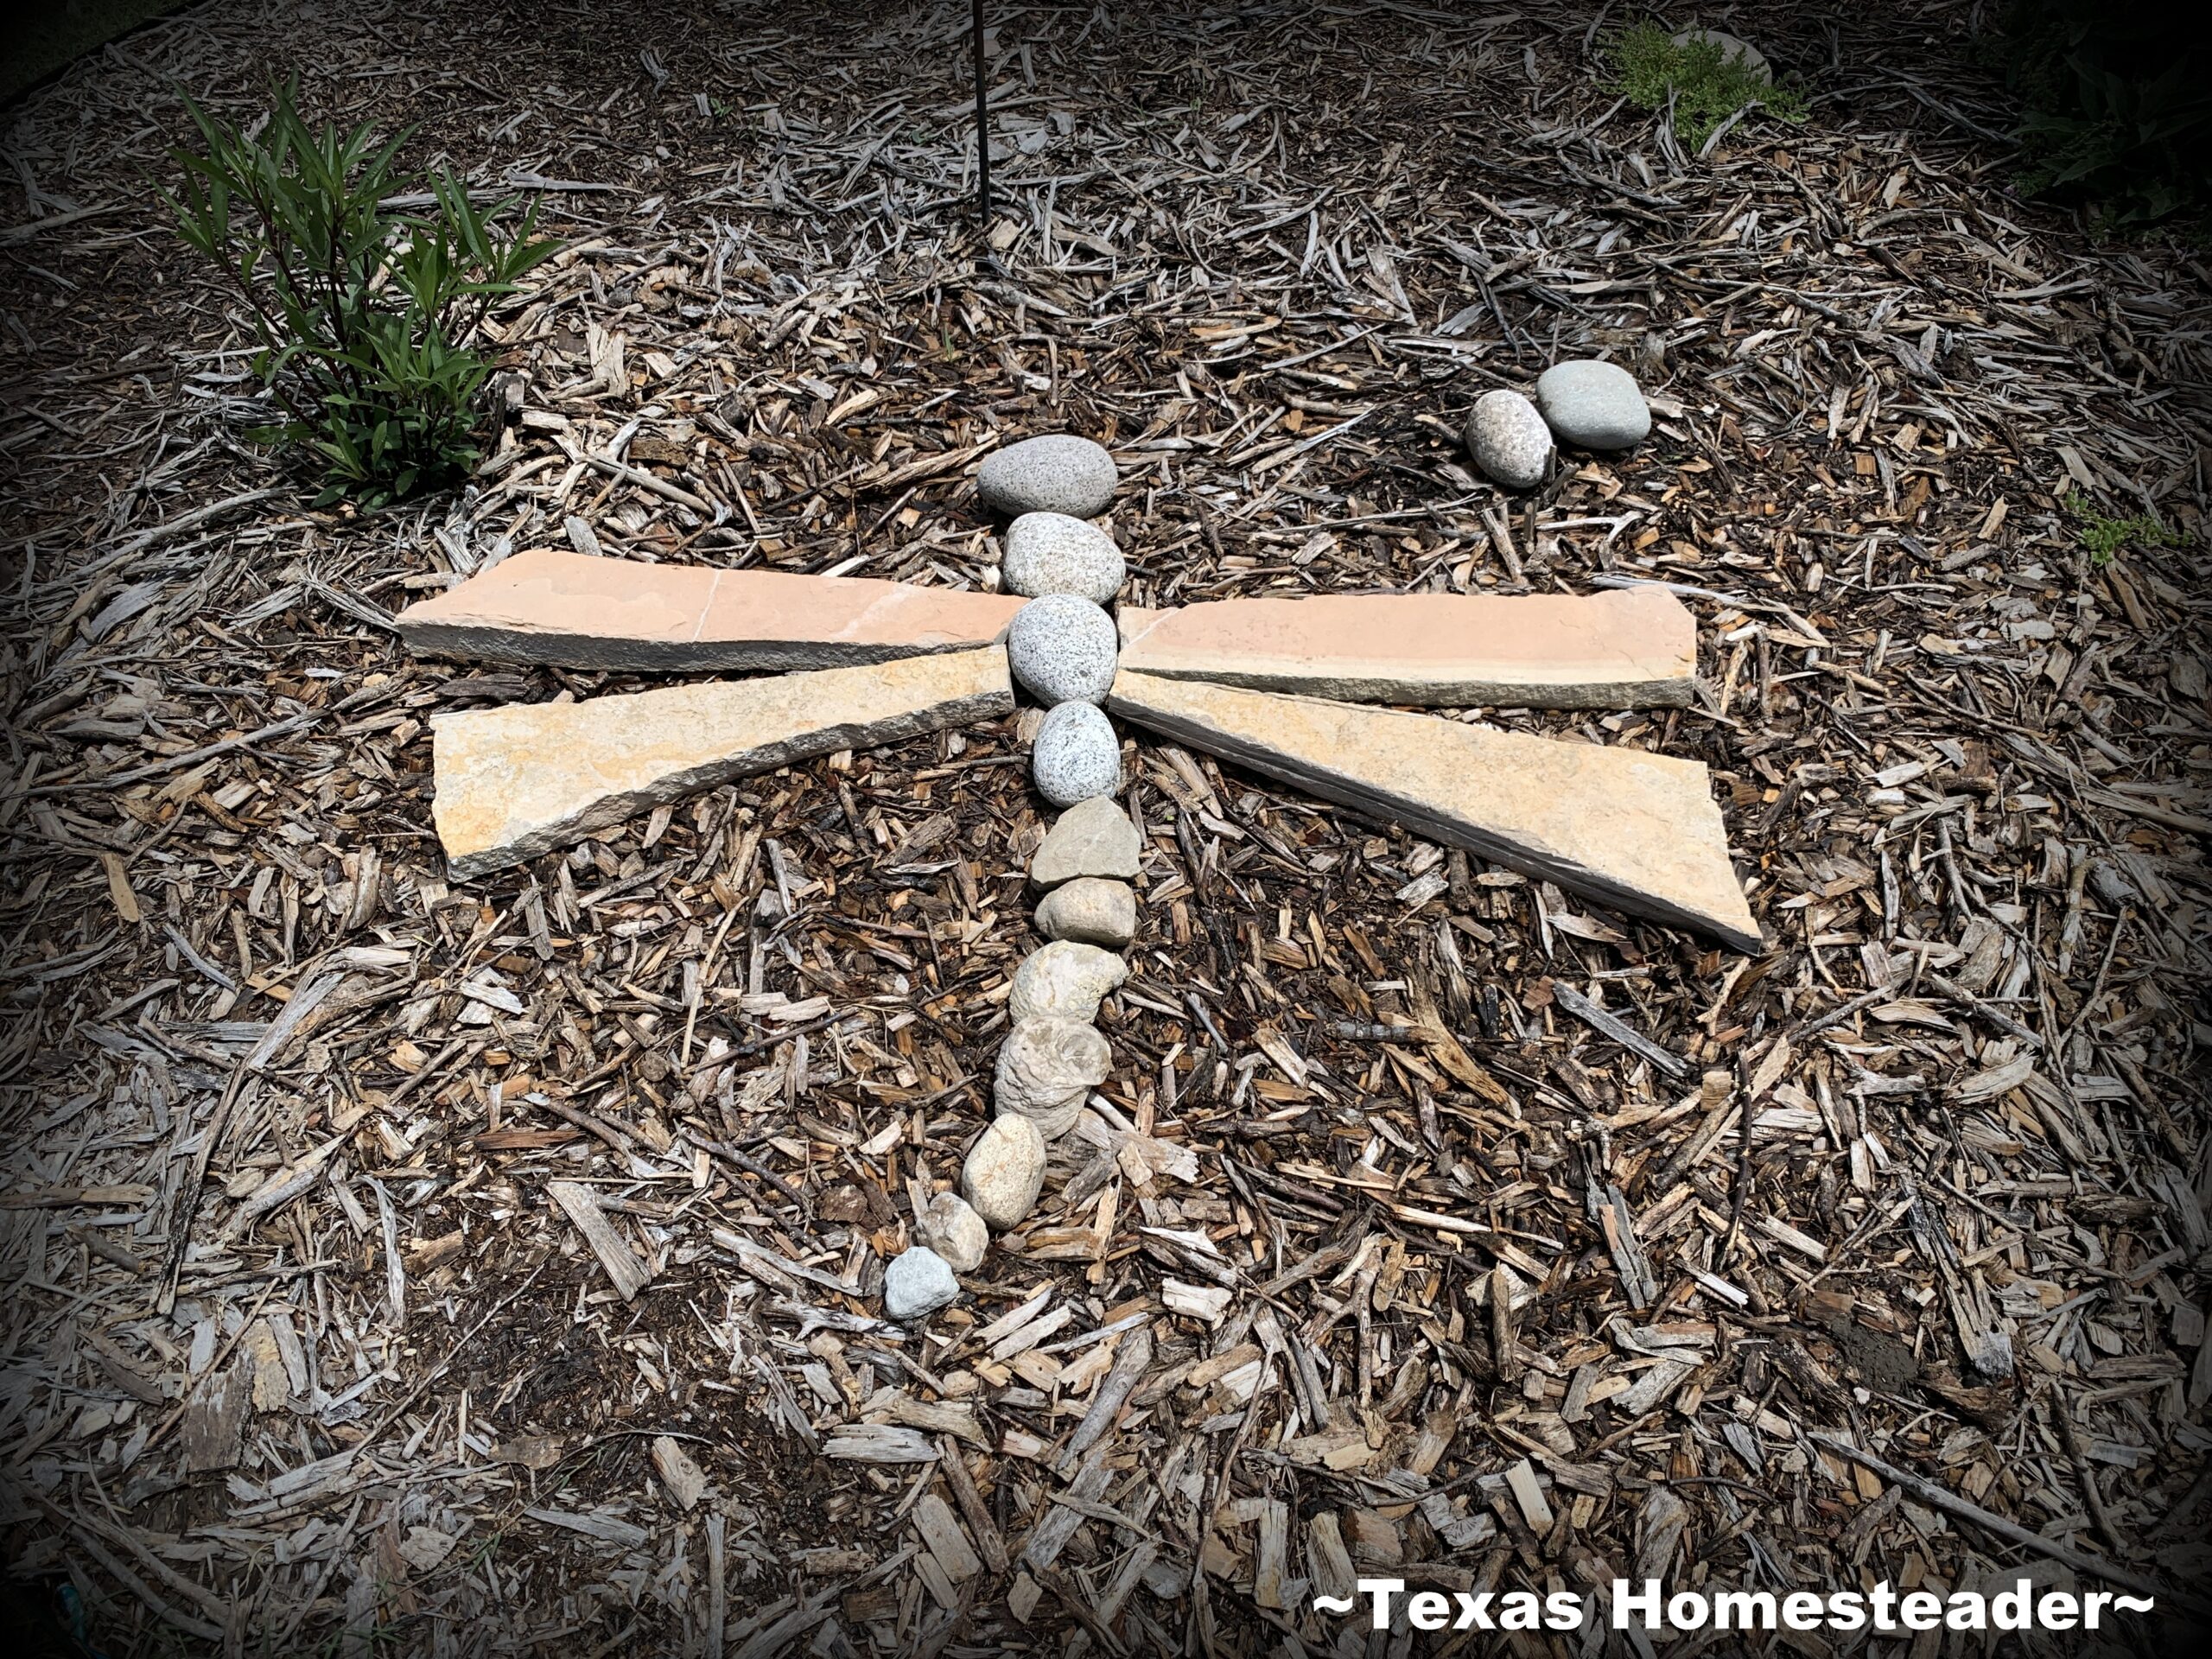 Dragonfly rock art feature made from various rocks placed in our Northeast Texas garden. #TexasHomesteader